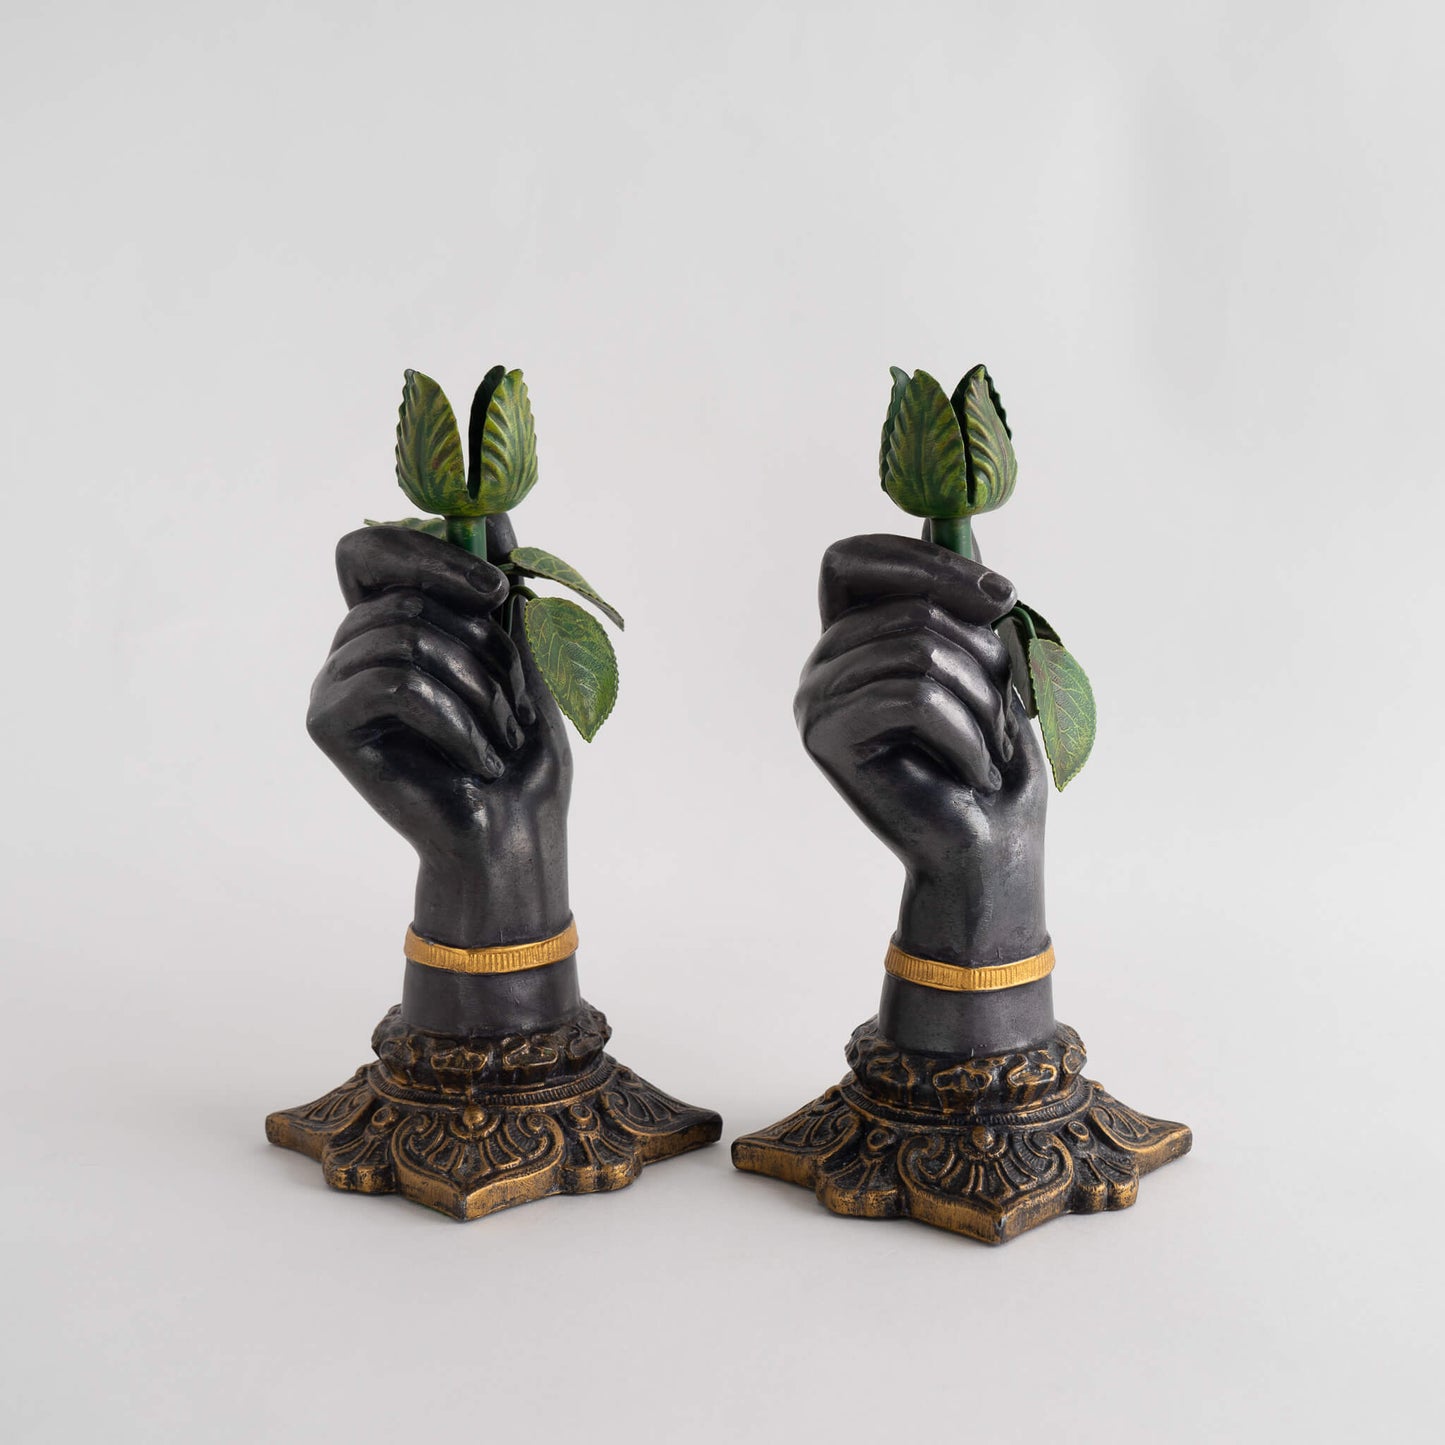 Vintage Petites Choses Iron Hand Candle Holder - A Pair